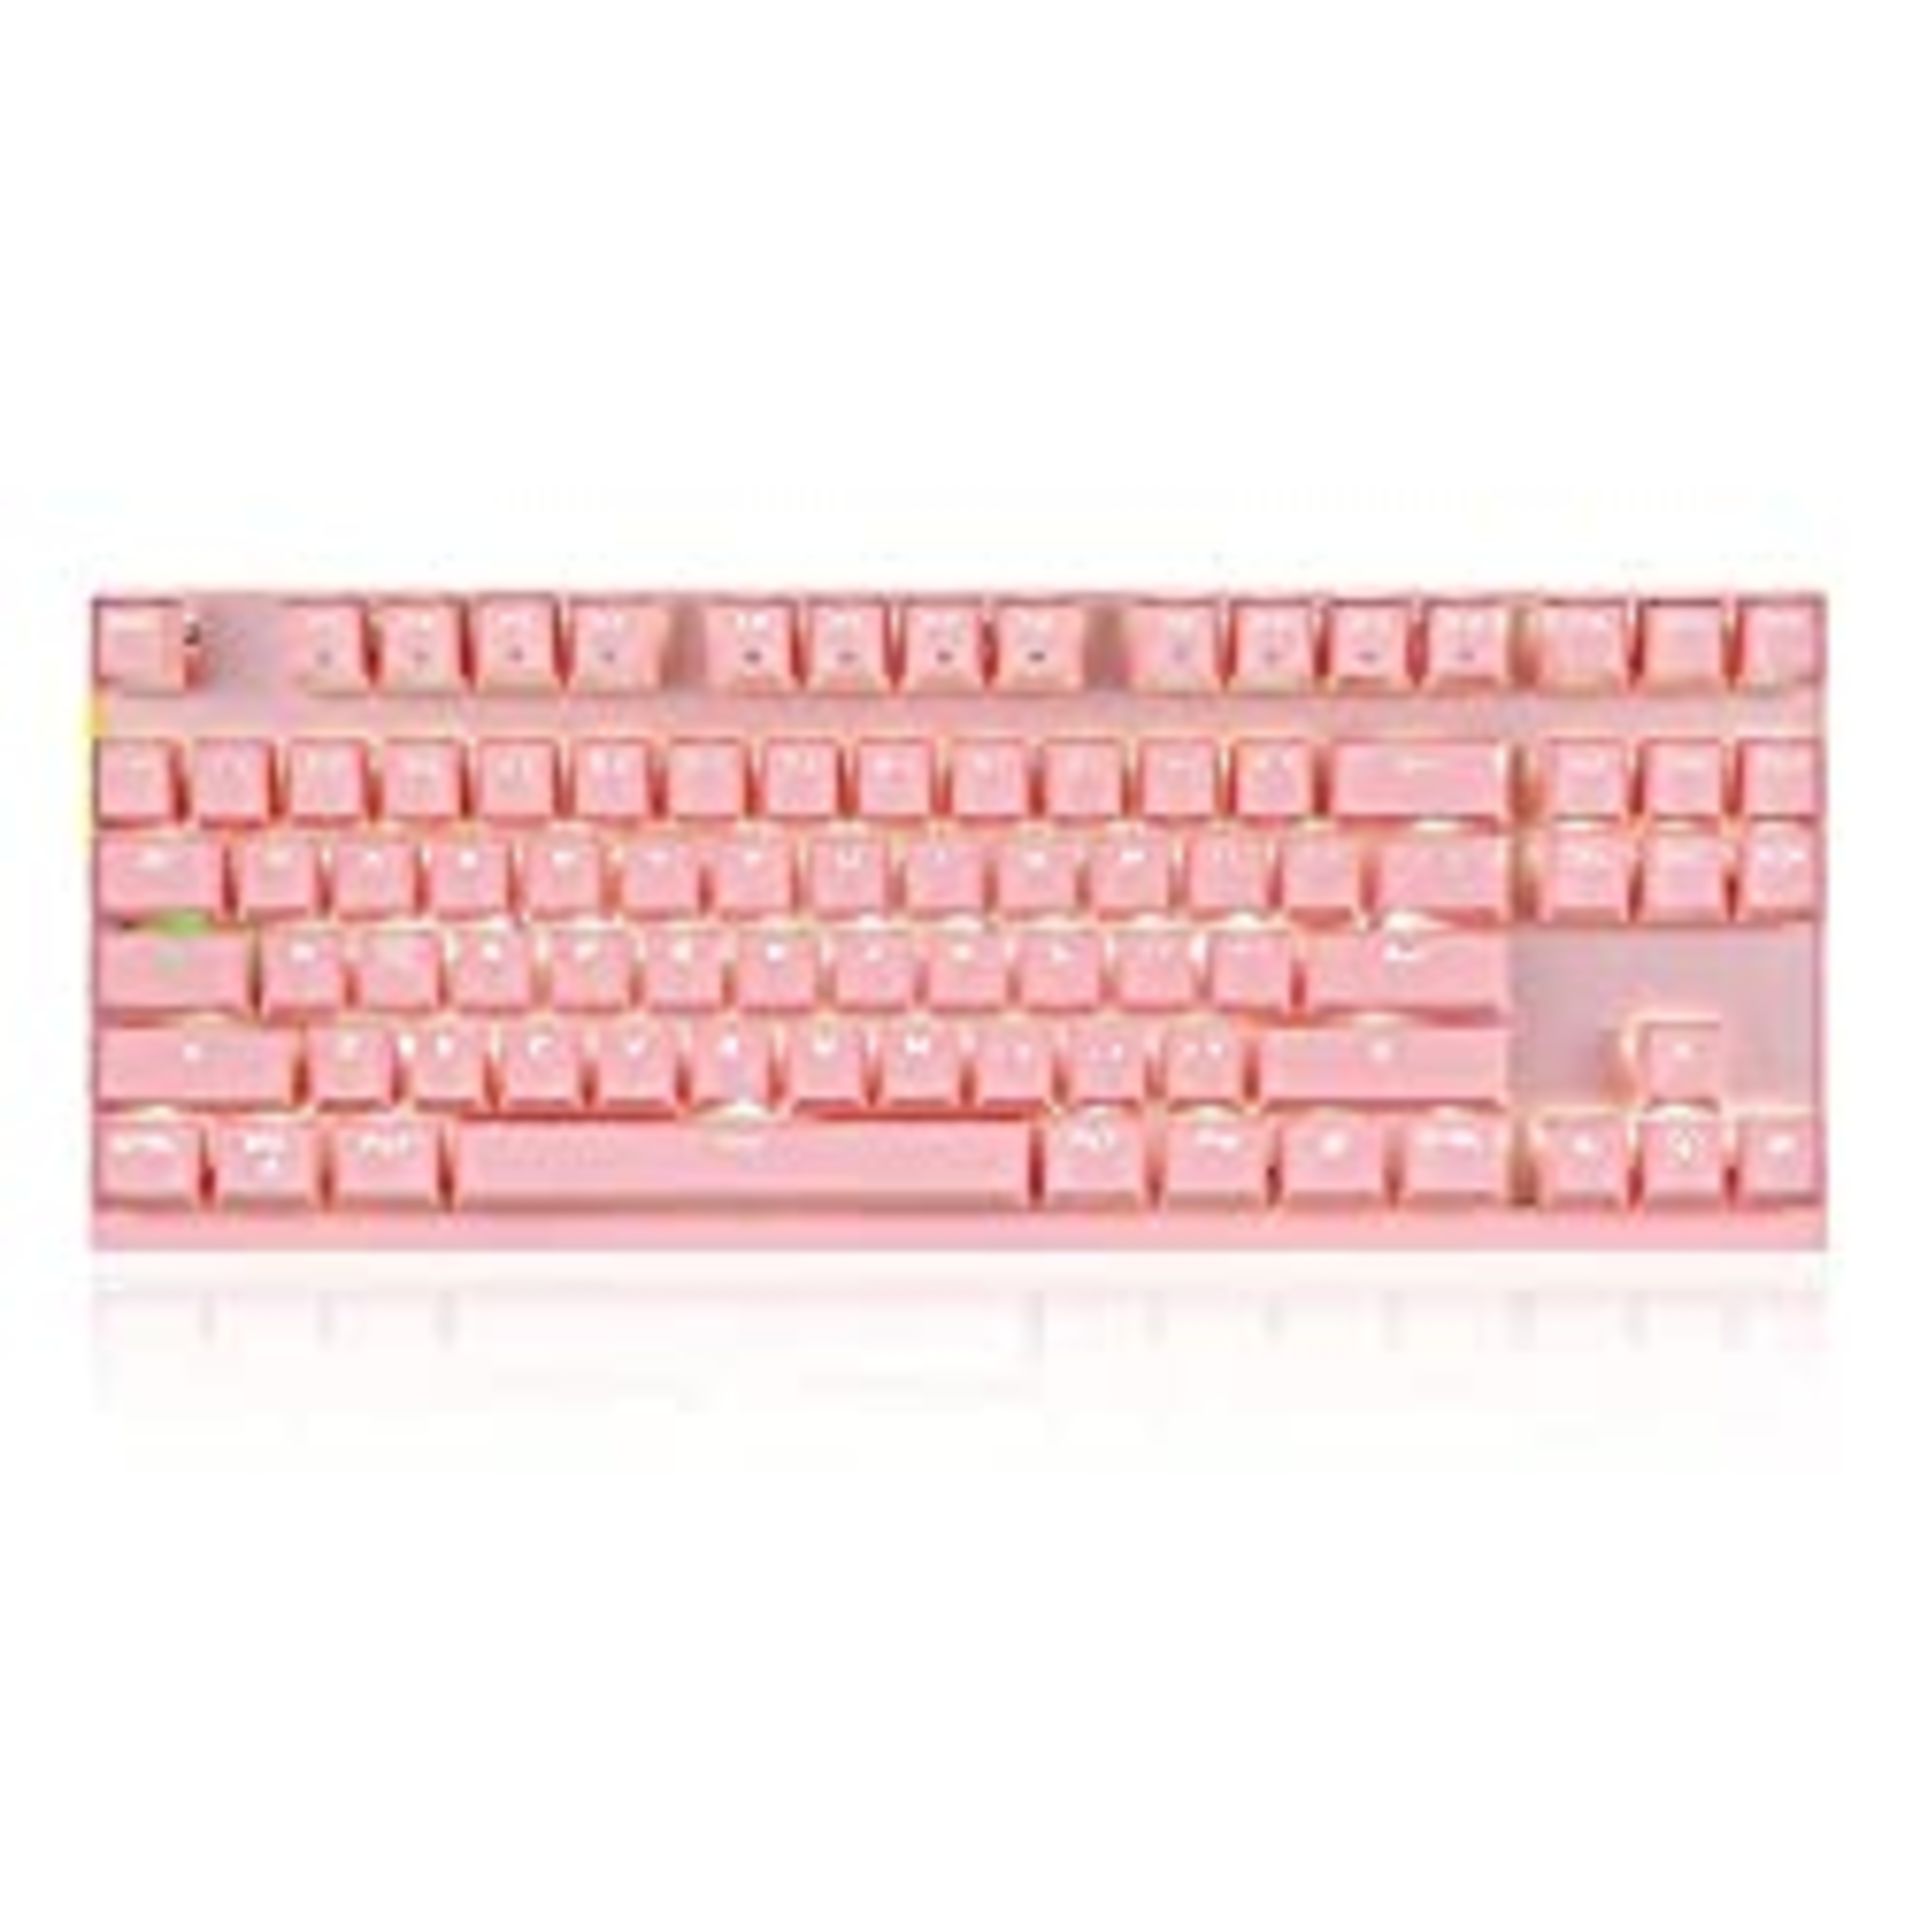 RRP £35.99 MOTOSPEED 2.4GHz Wireless/Wired Mechanical Gaming Keyboard